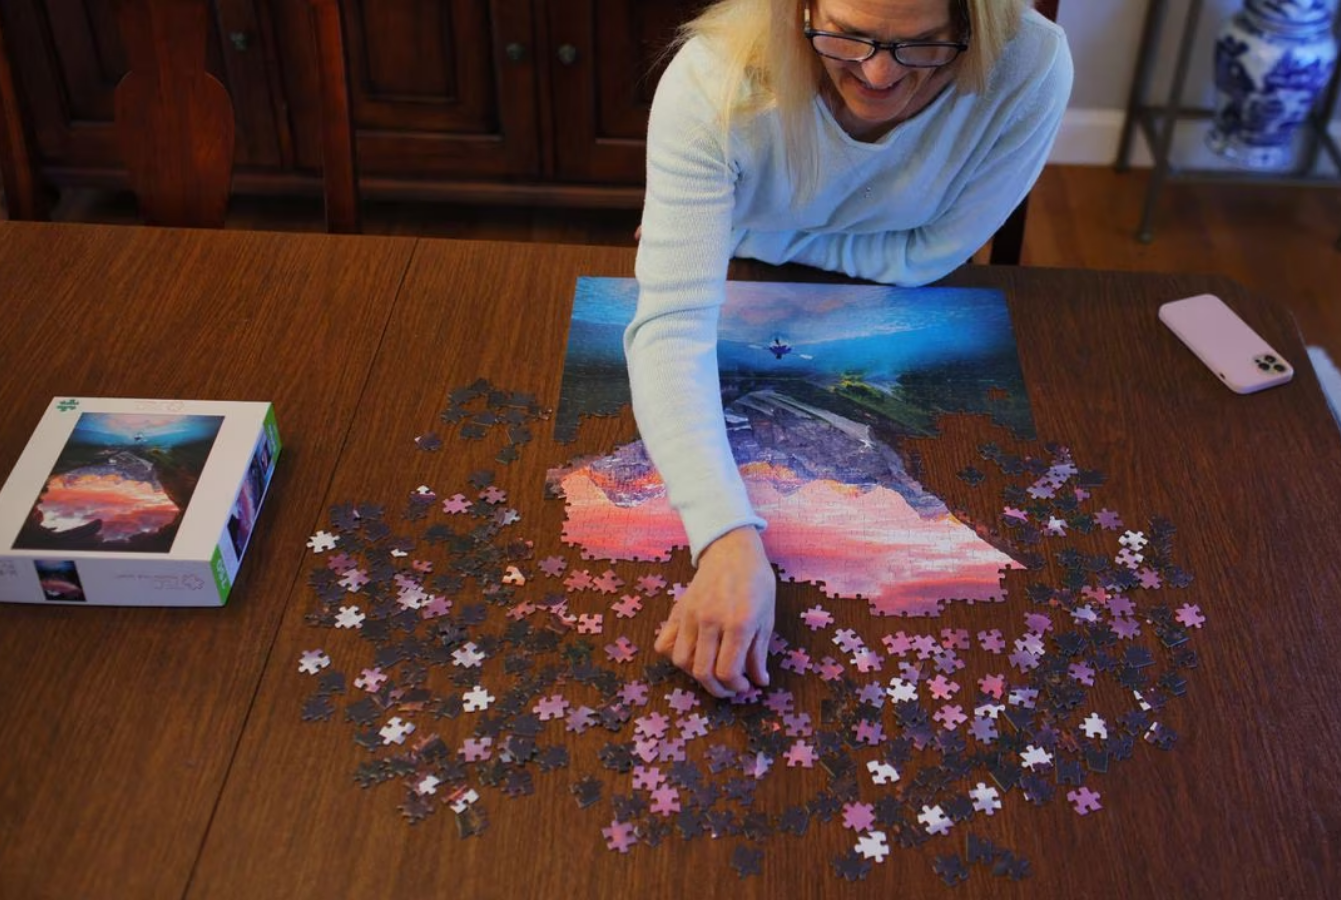 Wendy Nelson does a puzzle at her home in Foxborough, Massachusetts, U.S., March 21, 2023. Wendy Nelson's mother died from Alzheimer's disease, her father suffers from it, and genetic tests show that Wendy carries two APOE4 gene variants, and her three daughters each carry one APOE4 gene variant, indicating an increased risk of Alzheimer's disease. Photo: Reuters